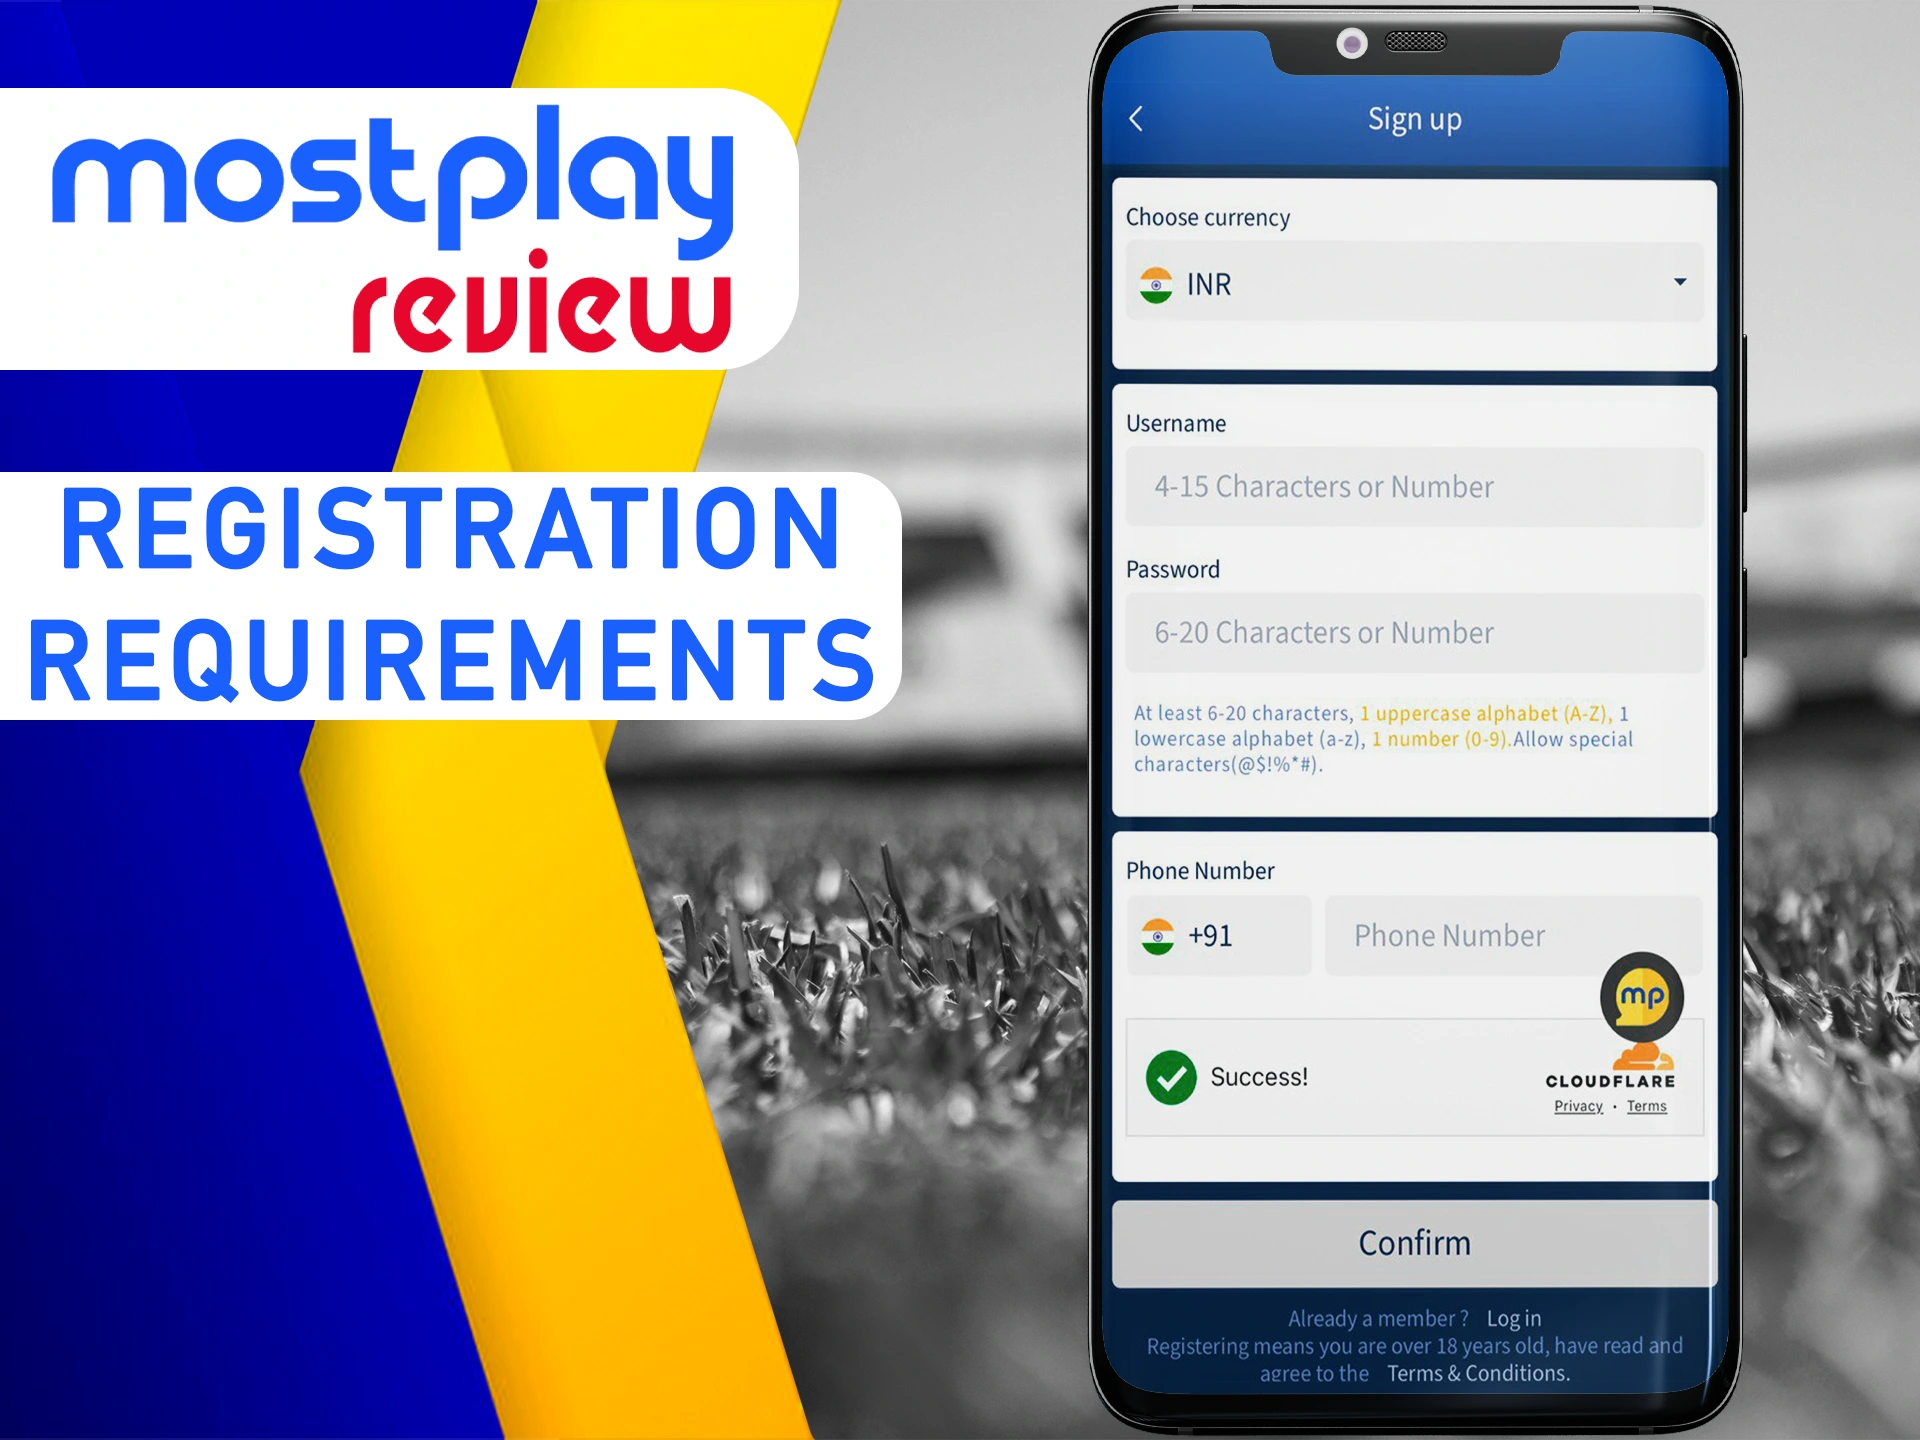 Follow Mostplay rules when making new account.